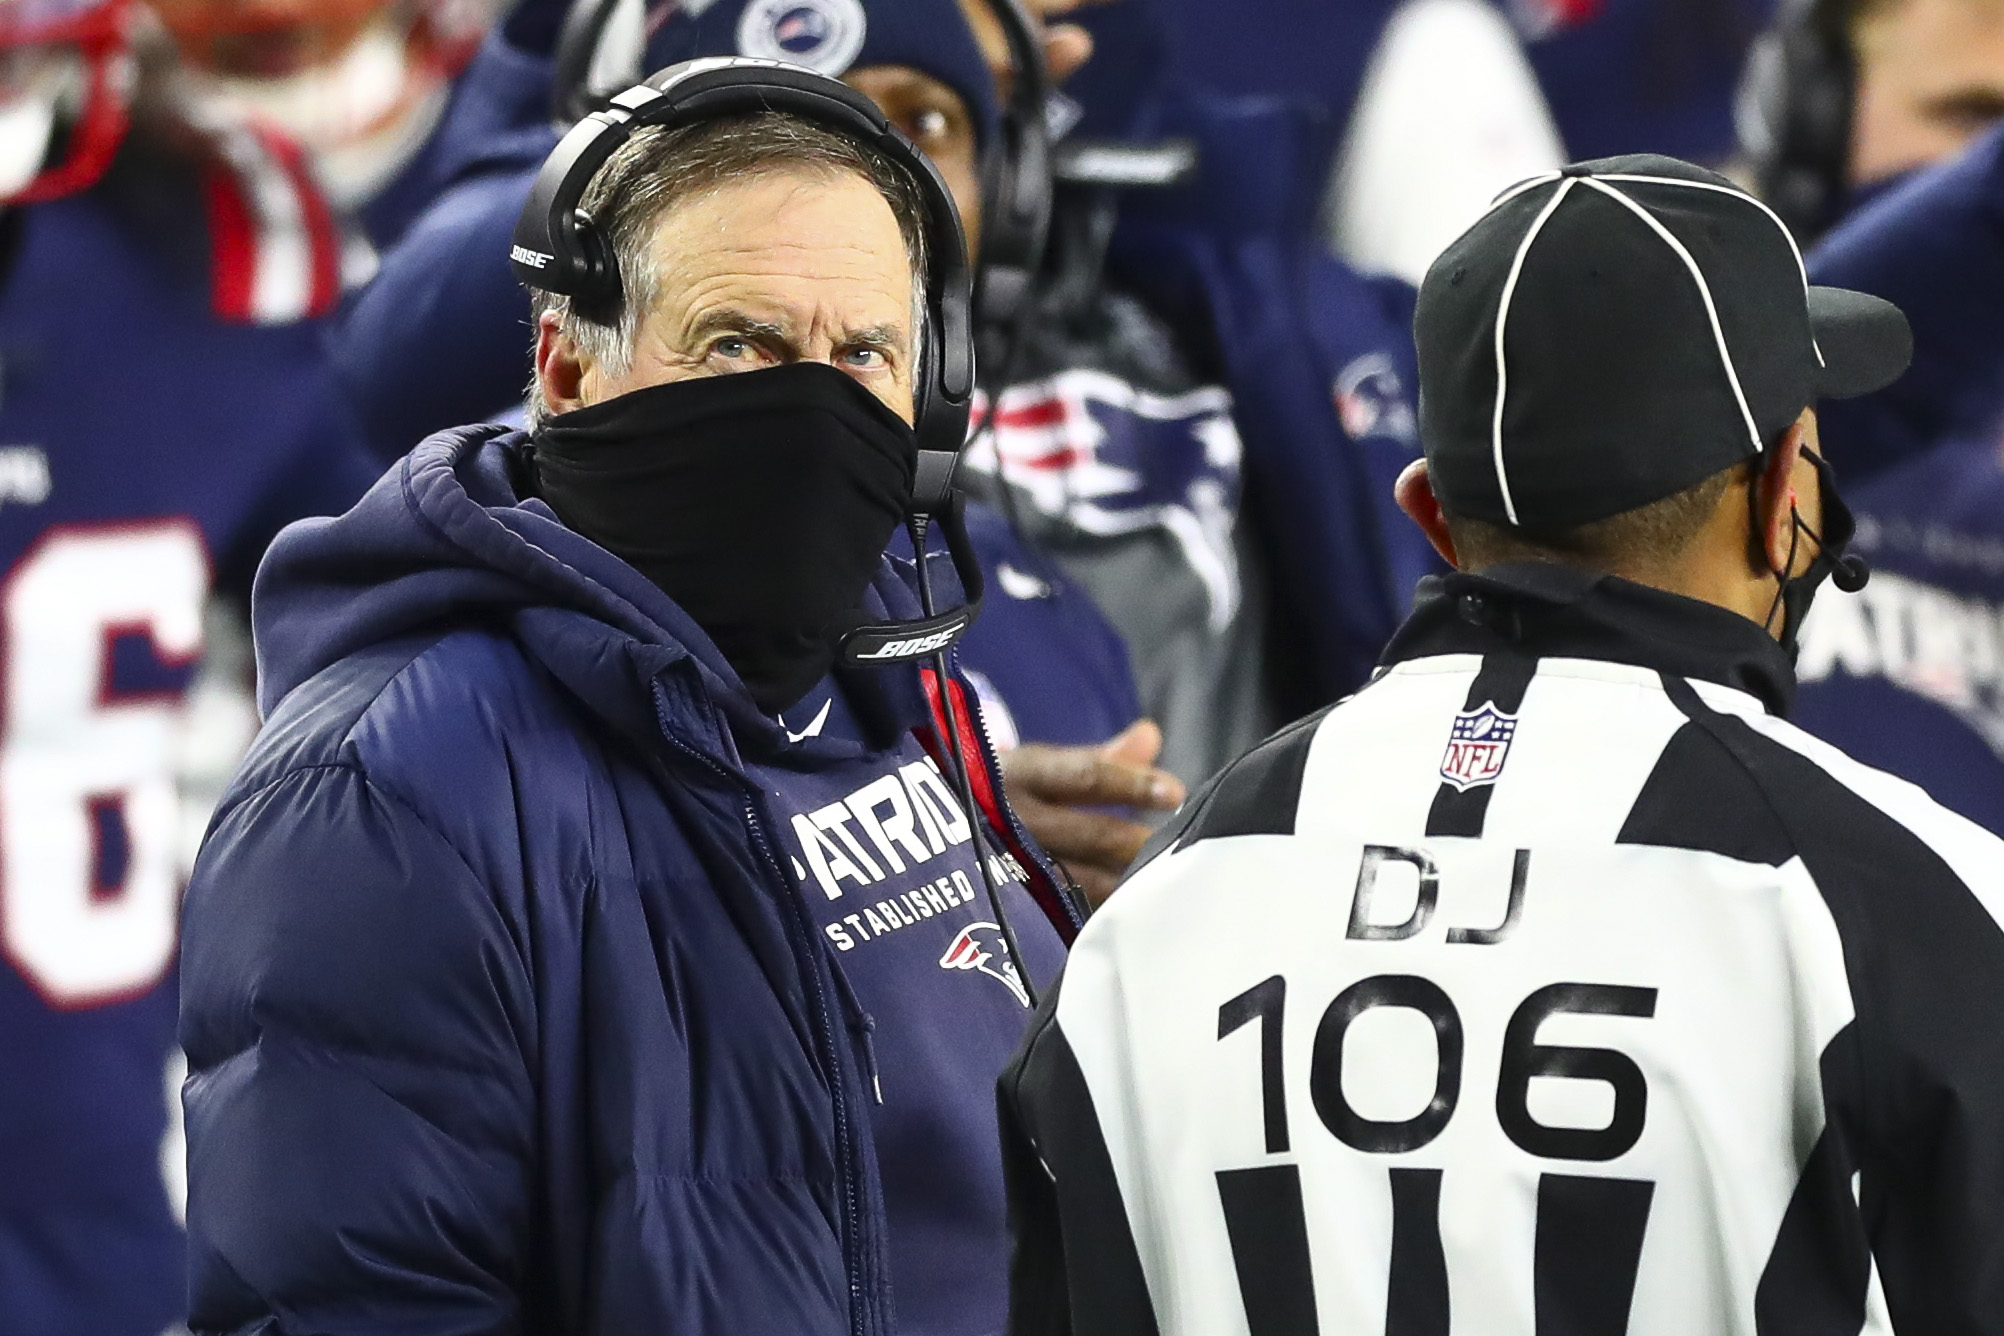 FOXBOROUGH, MA - DECEMBER 28: Head coach Bill Belichick of the New England Patriots talks to an official during a game against the Buffalo Bills at Gillette Stadium on December 28, 2020 in Foxborough, Massachusetts.